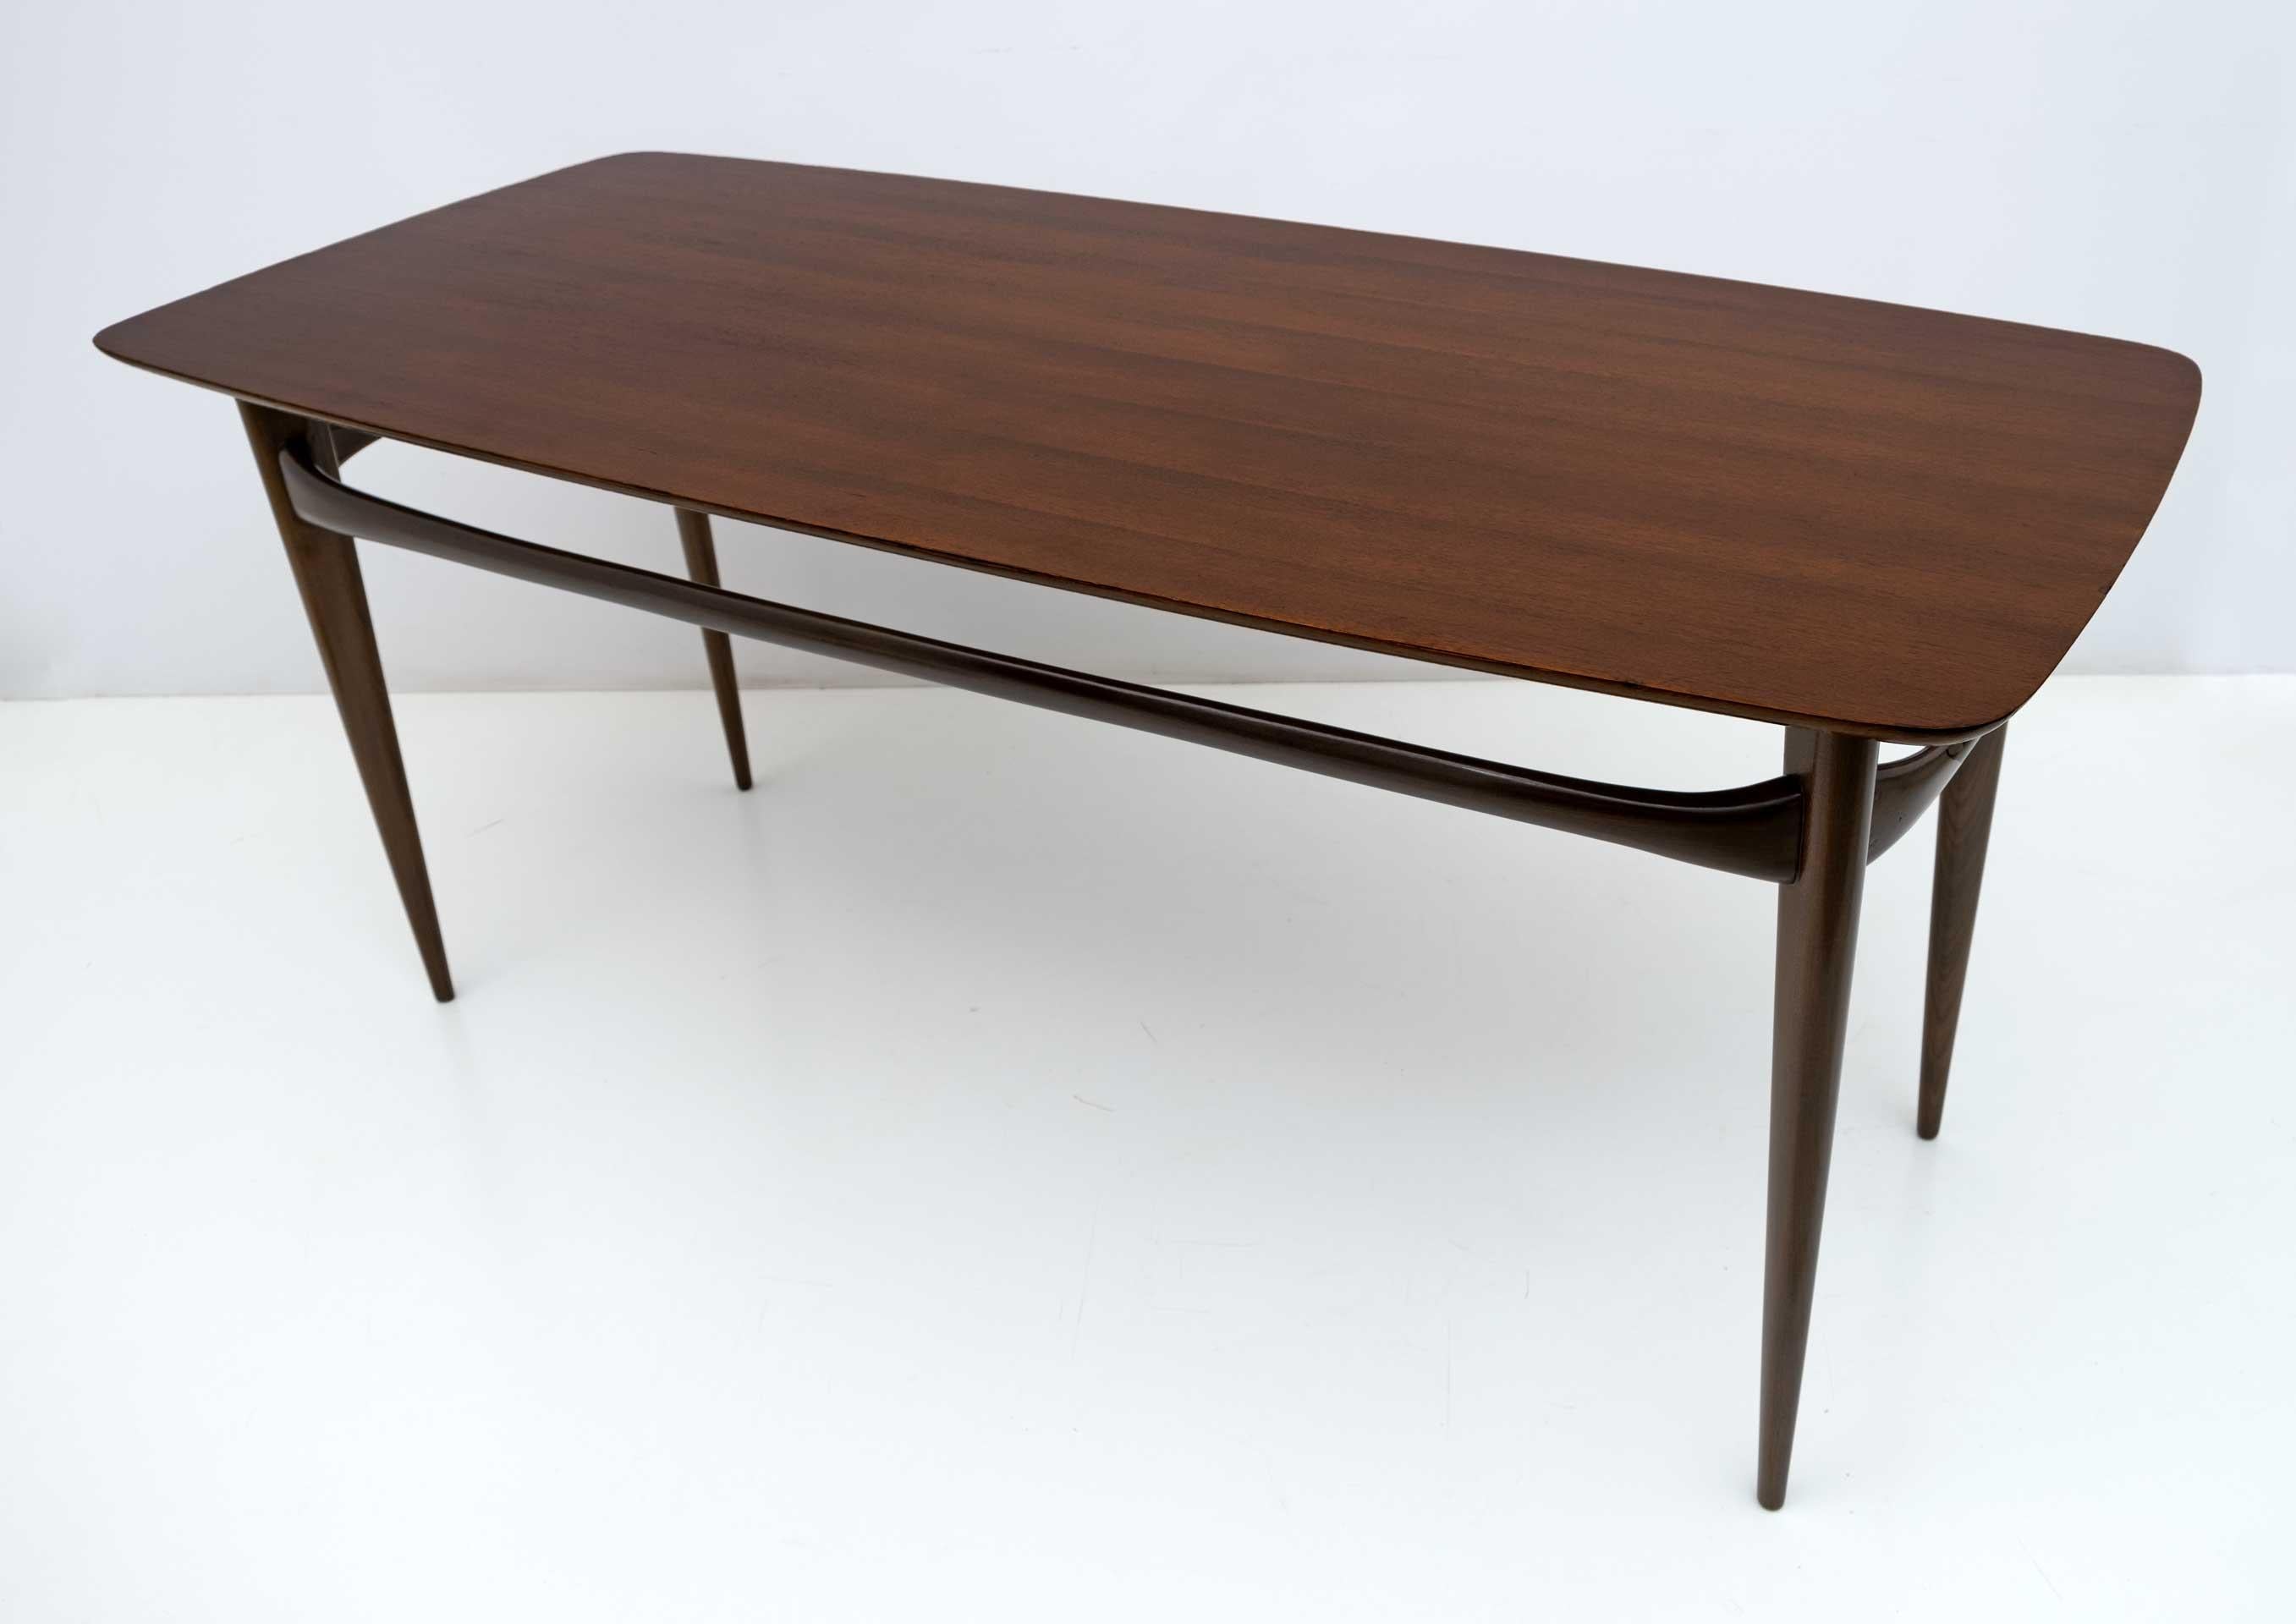 Mahogany table designed by Silvio Cavatorta in the 60s. Completely restored and polished with shellac